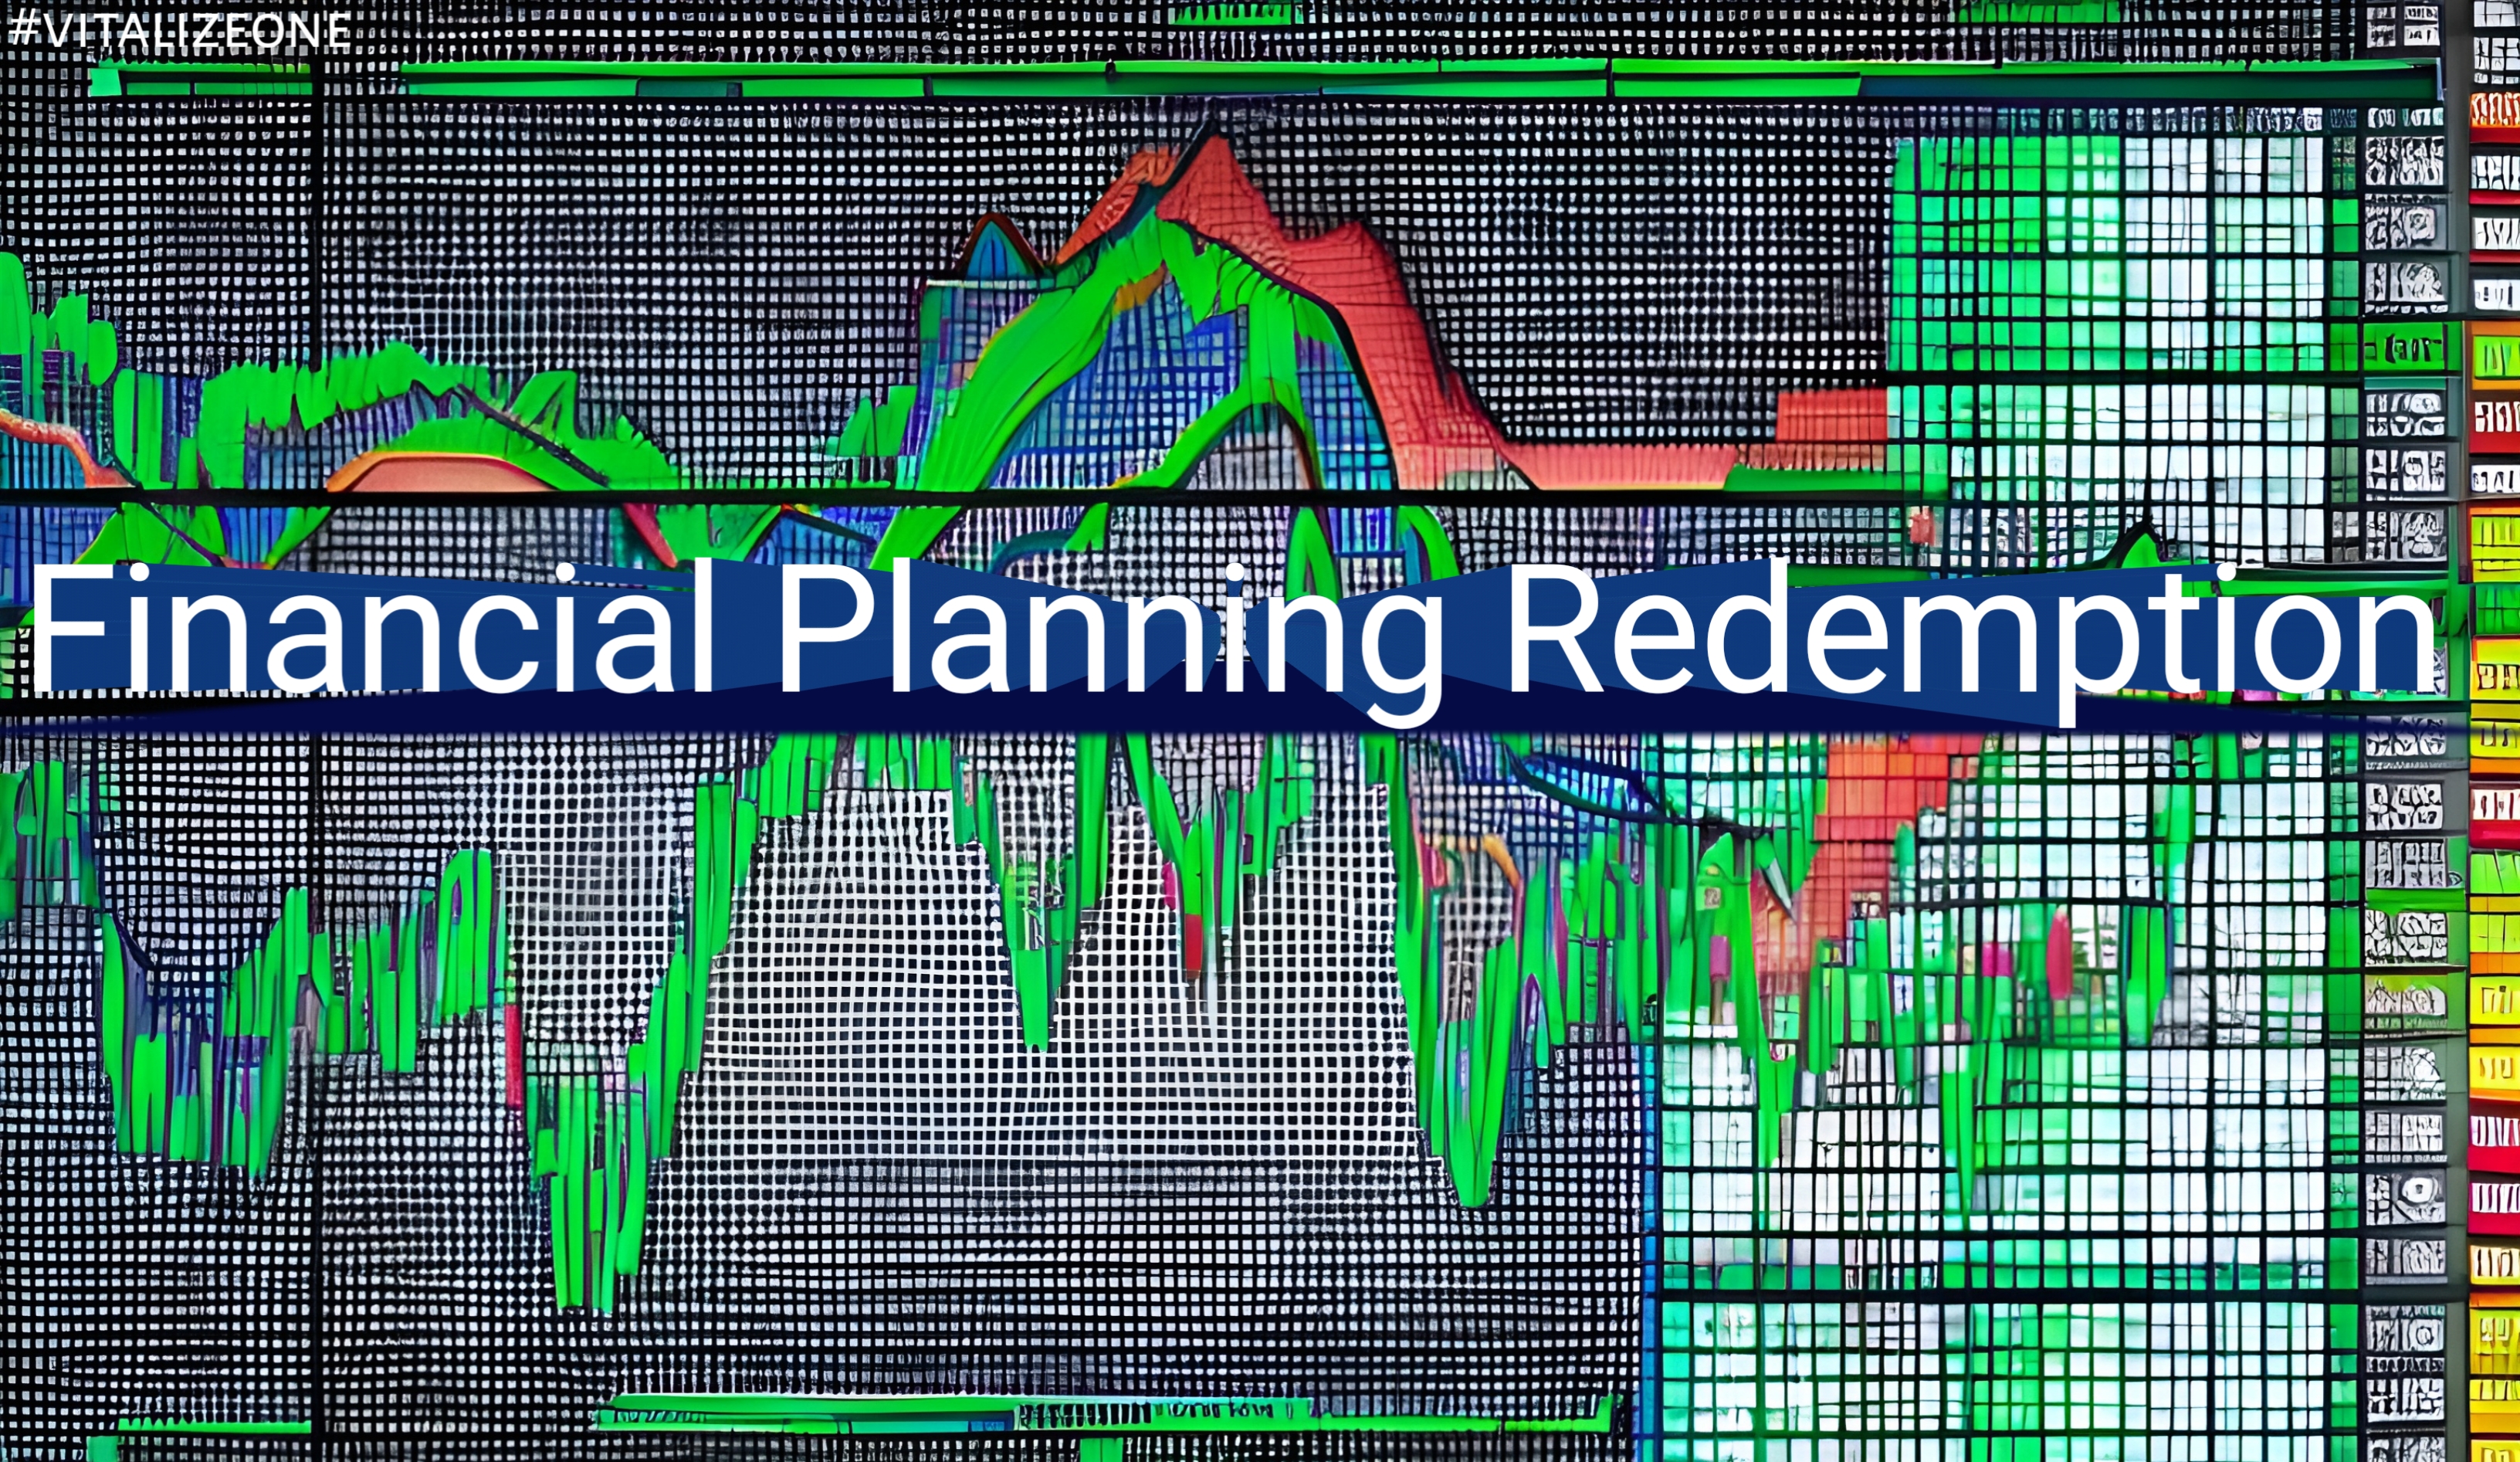 Financial Planning Redemption: The Rise After Financial Crisis via Chatty Garrate | VitalyTennant.com | #vitalizeone